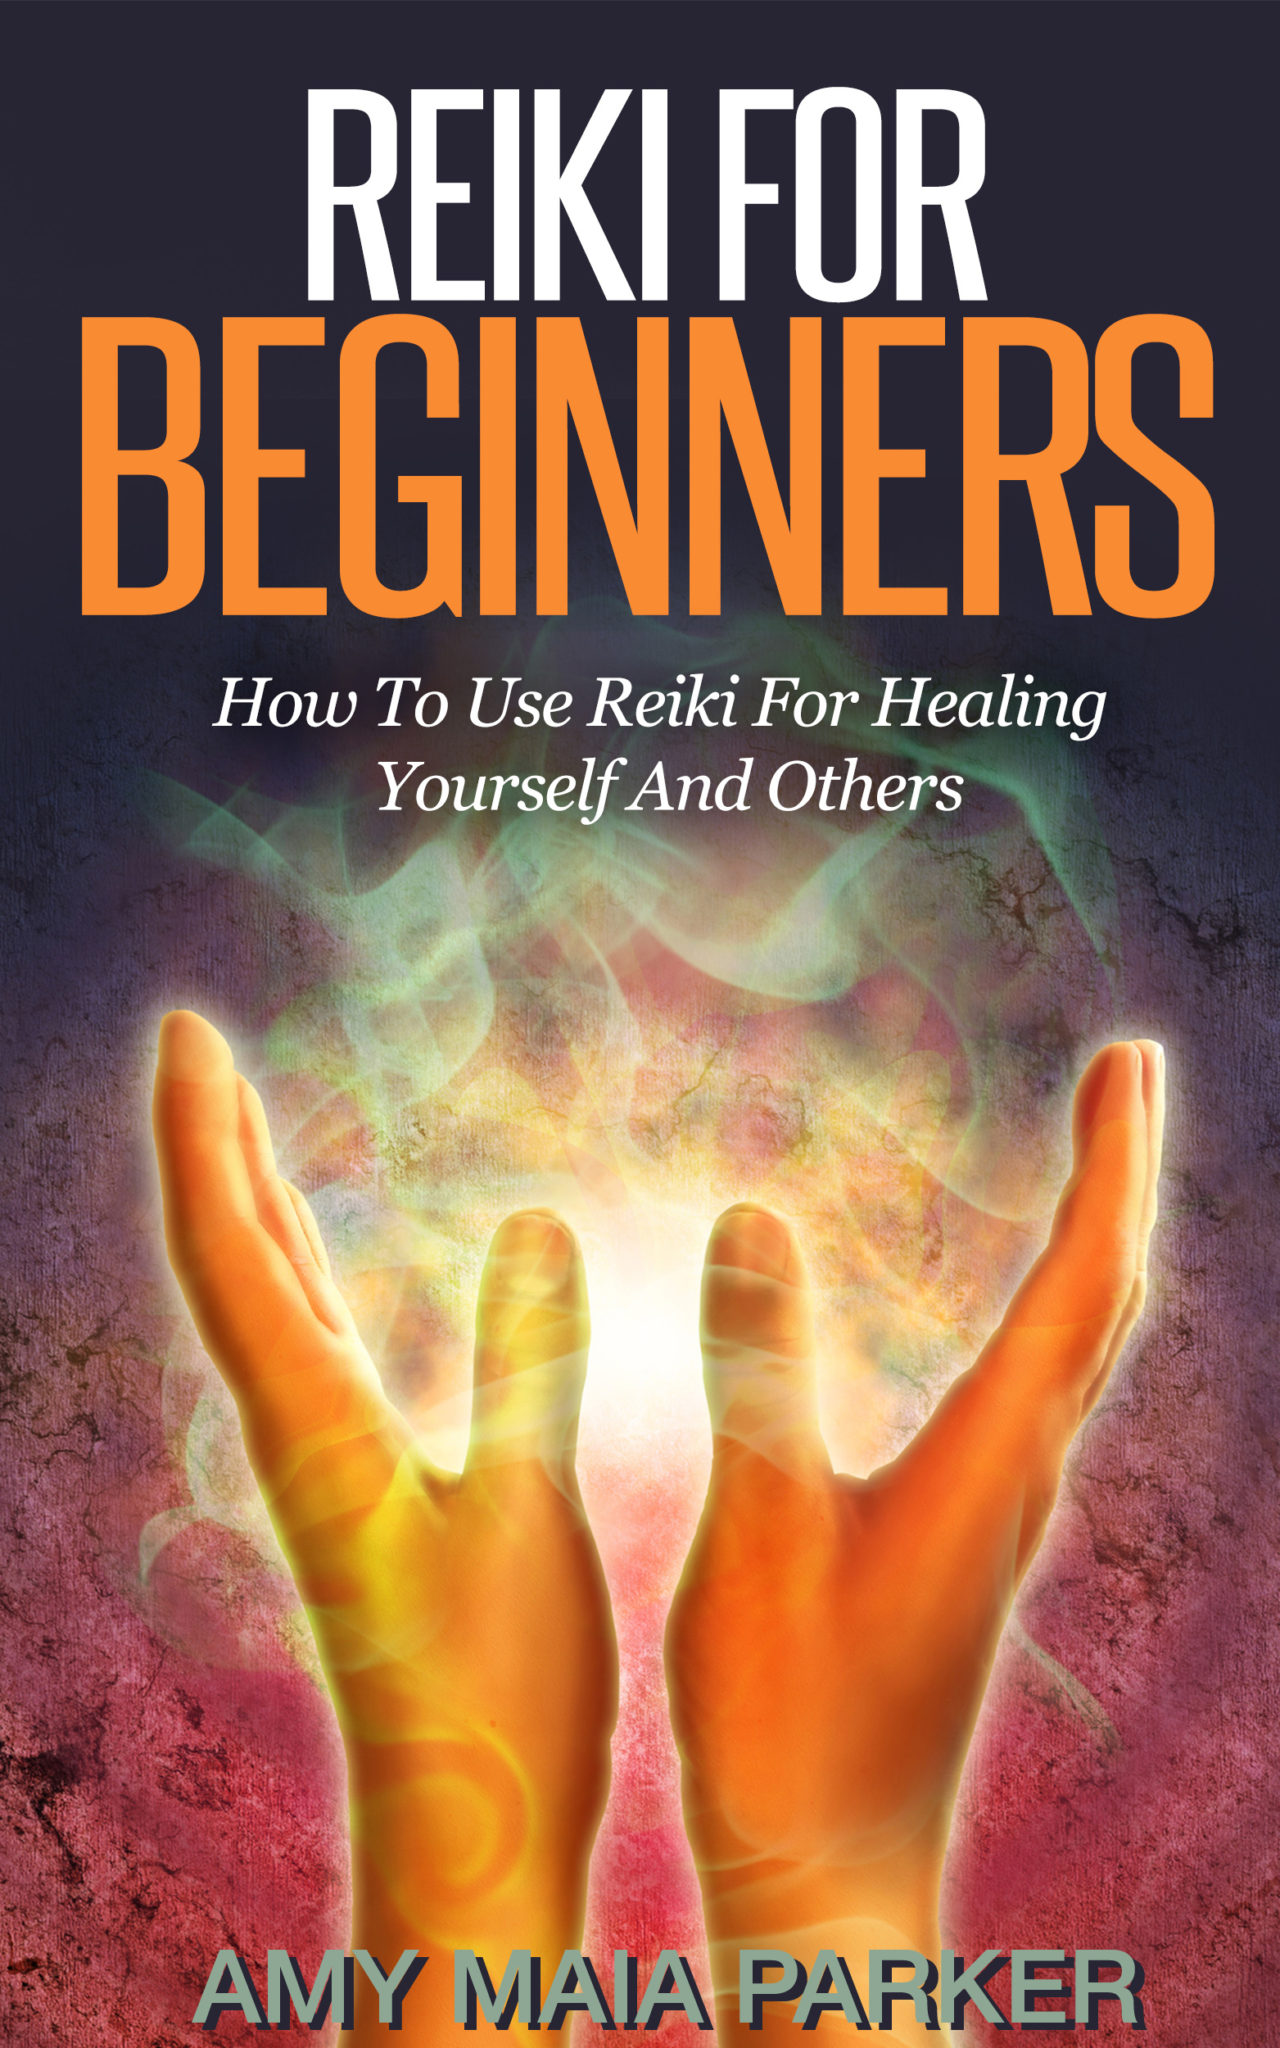 Reiki for Beginners – How To Use Reiki for Healing Yourself by Amy Maia Parker